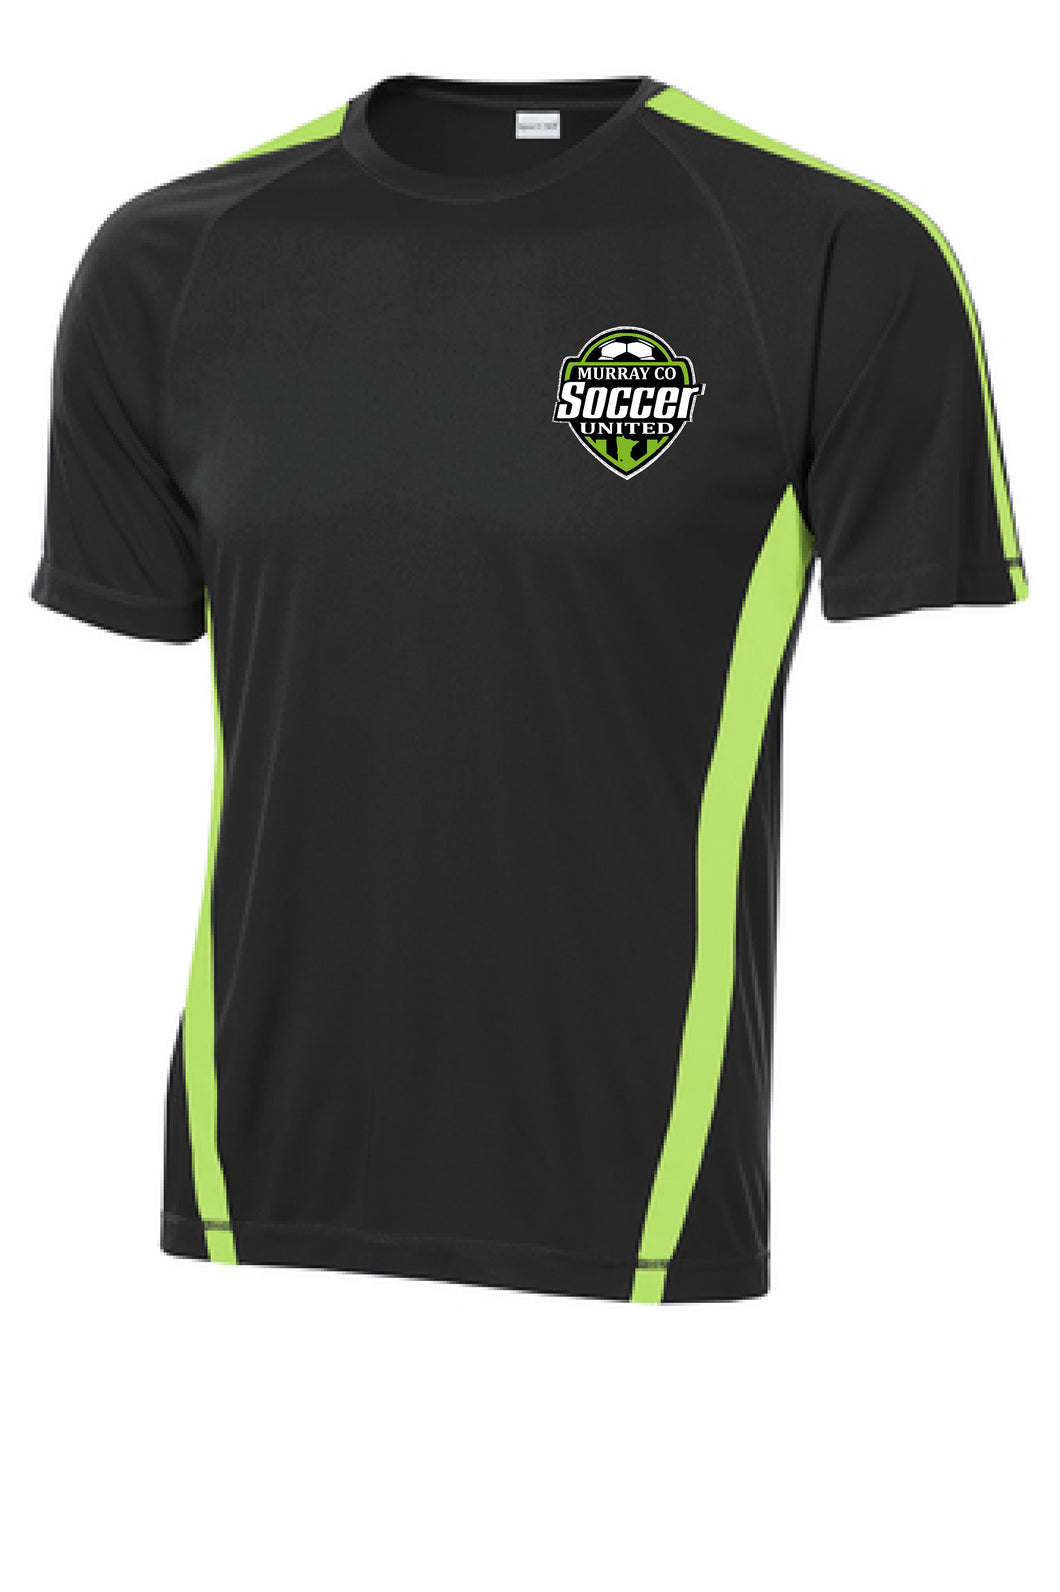 MURRAY COUNTY SOCCER UNITED ADULT BLACK COMPETITOR TEE